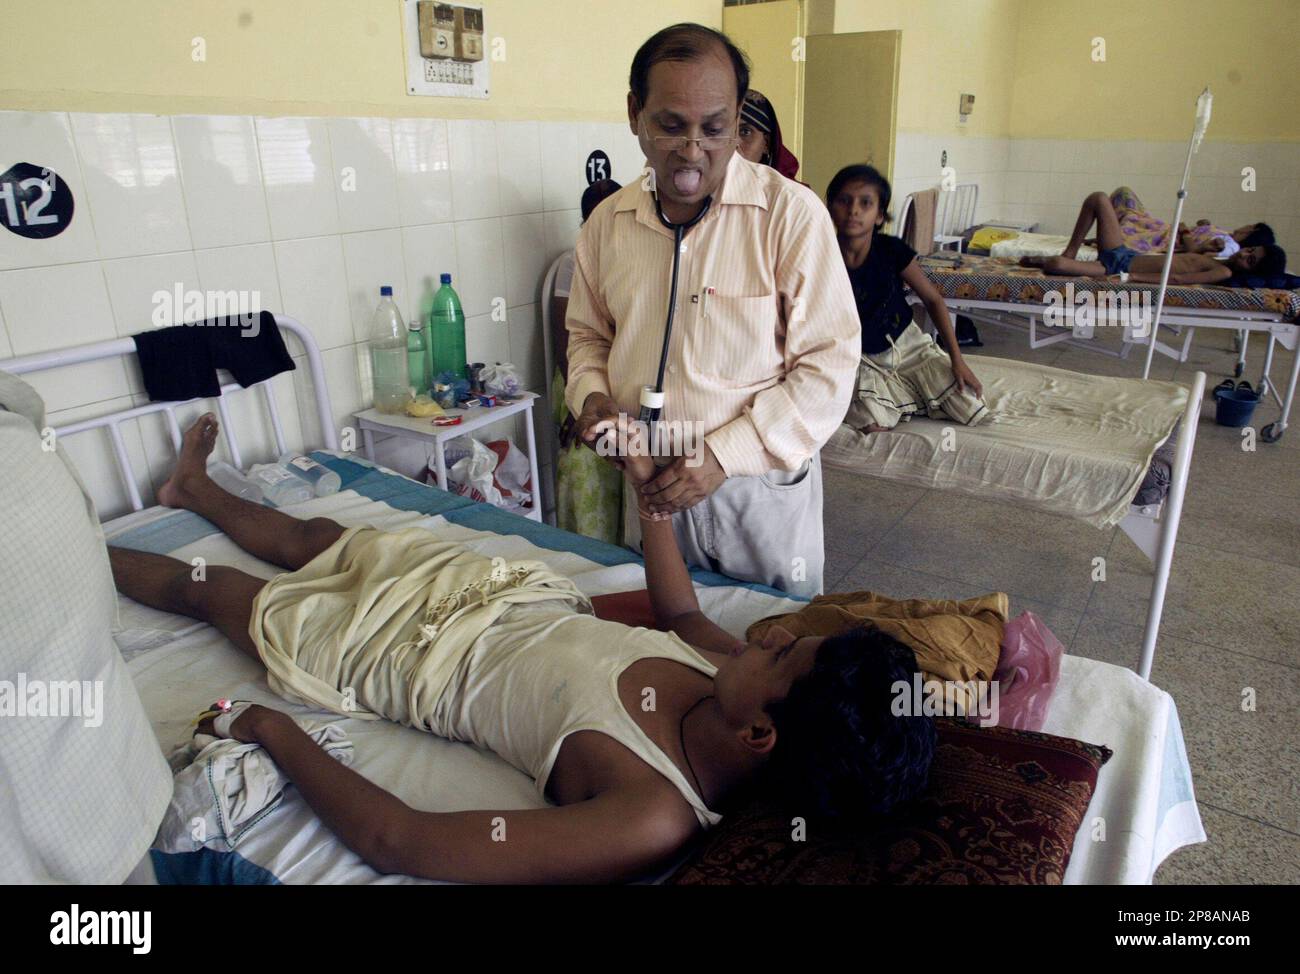 A doctor inspects a diarrhea patient at a hospital in Allahabad, India,  Monday, June 29, 2009. The number of diarrhea cases have increased due to  scorching weather conditions and a lack of